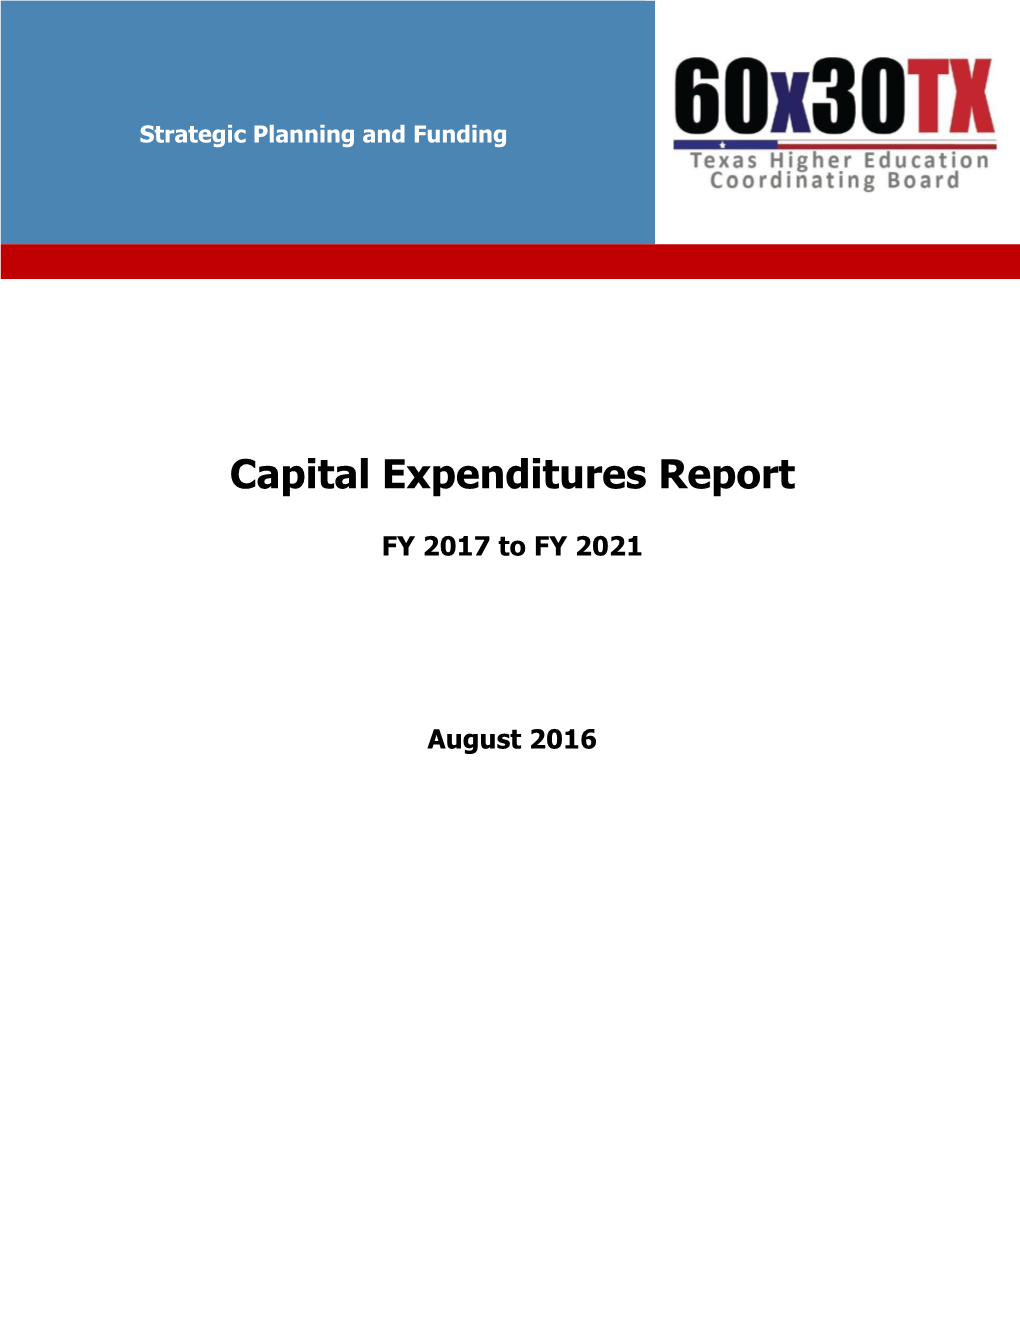 Capital Expenditure Plans of Public Universities, Health-Related Institutions, and State and Technical Colleges